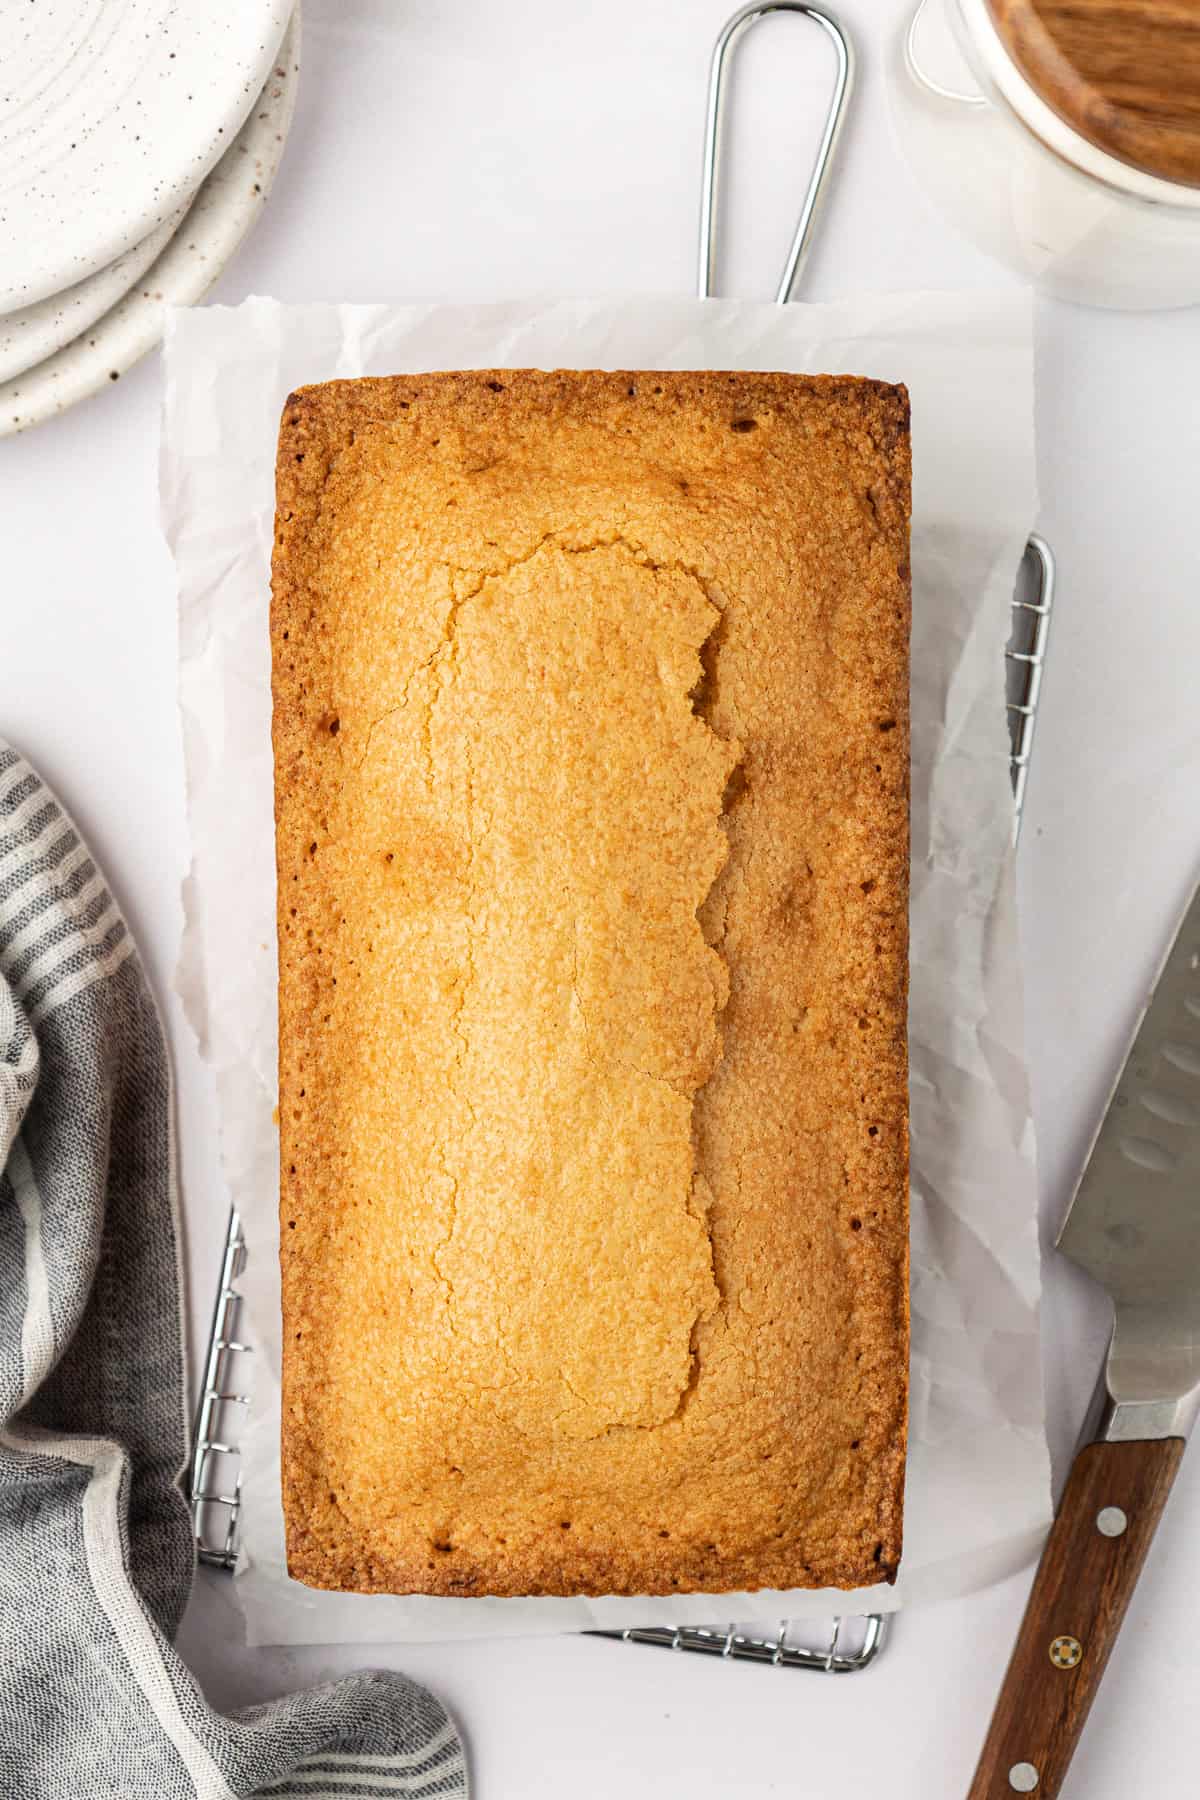 a whole pound cake sitting on parchment paper on a wire rack with a grey kitchen towel and a stack of plates to the left of it, a knife to the right